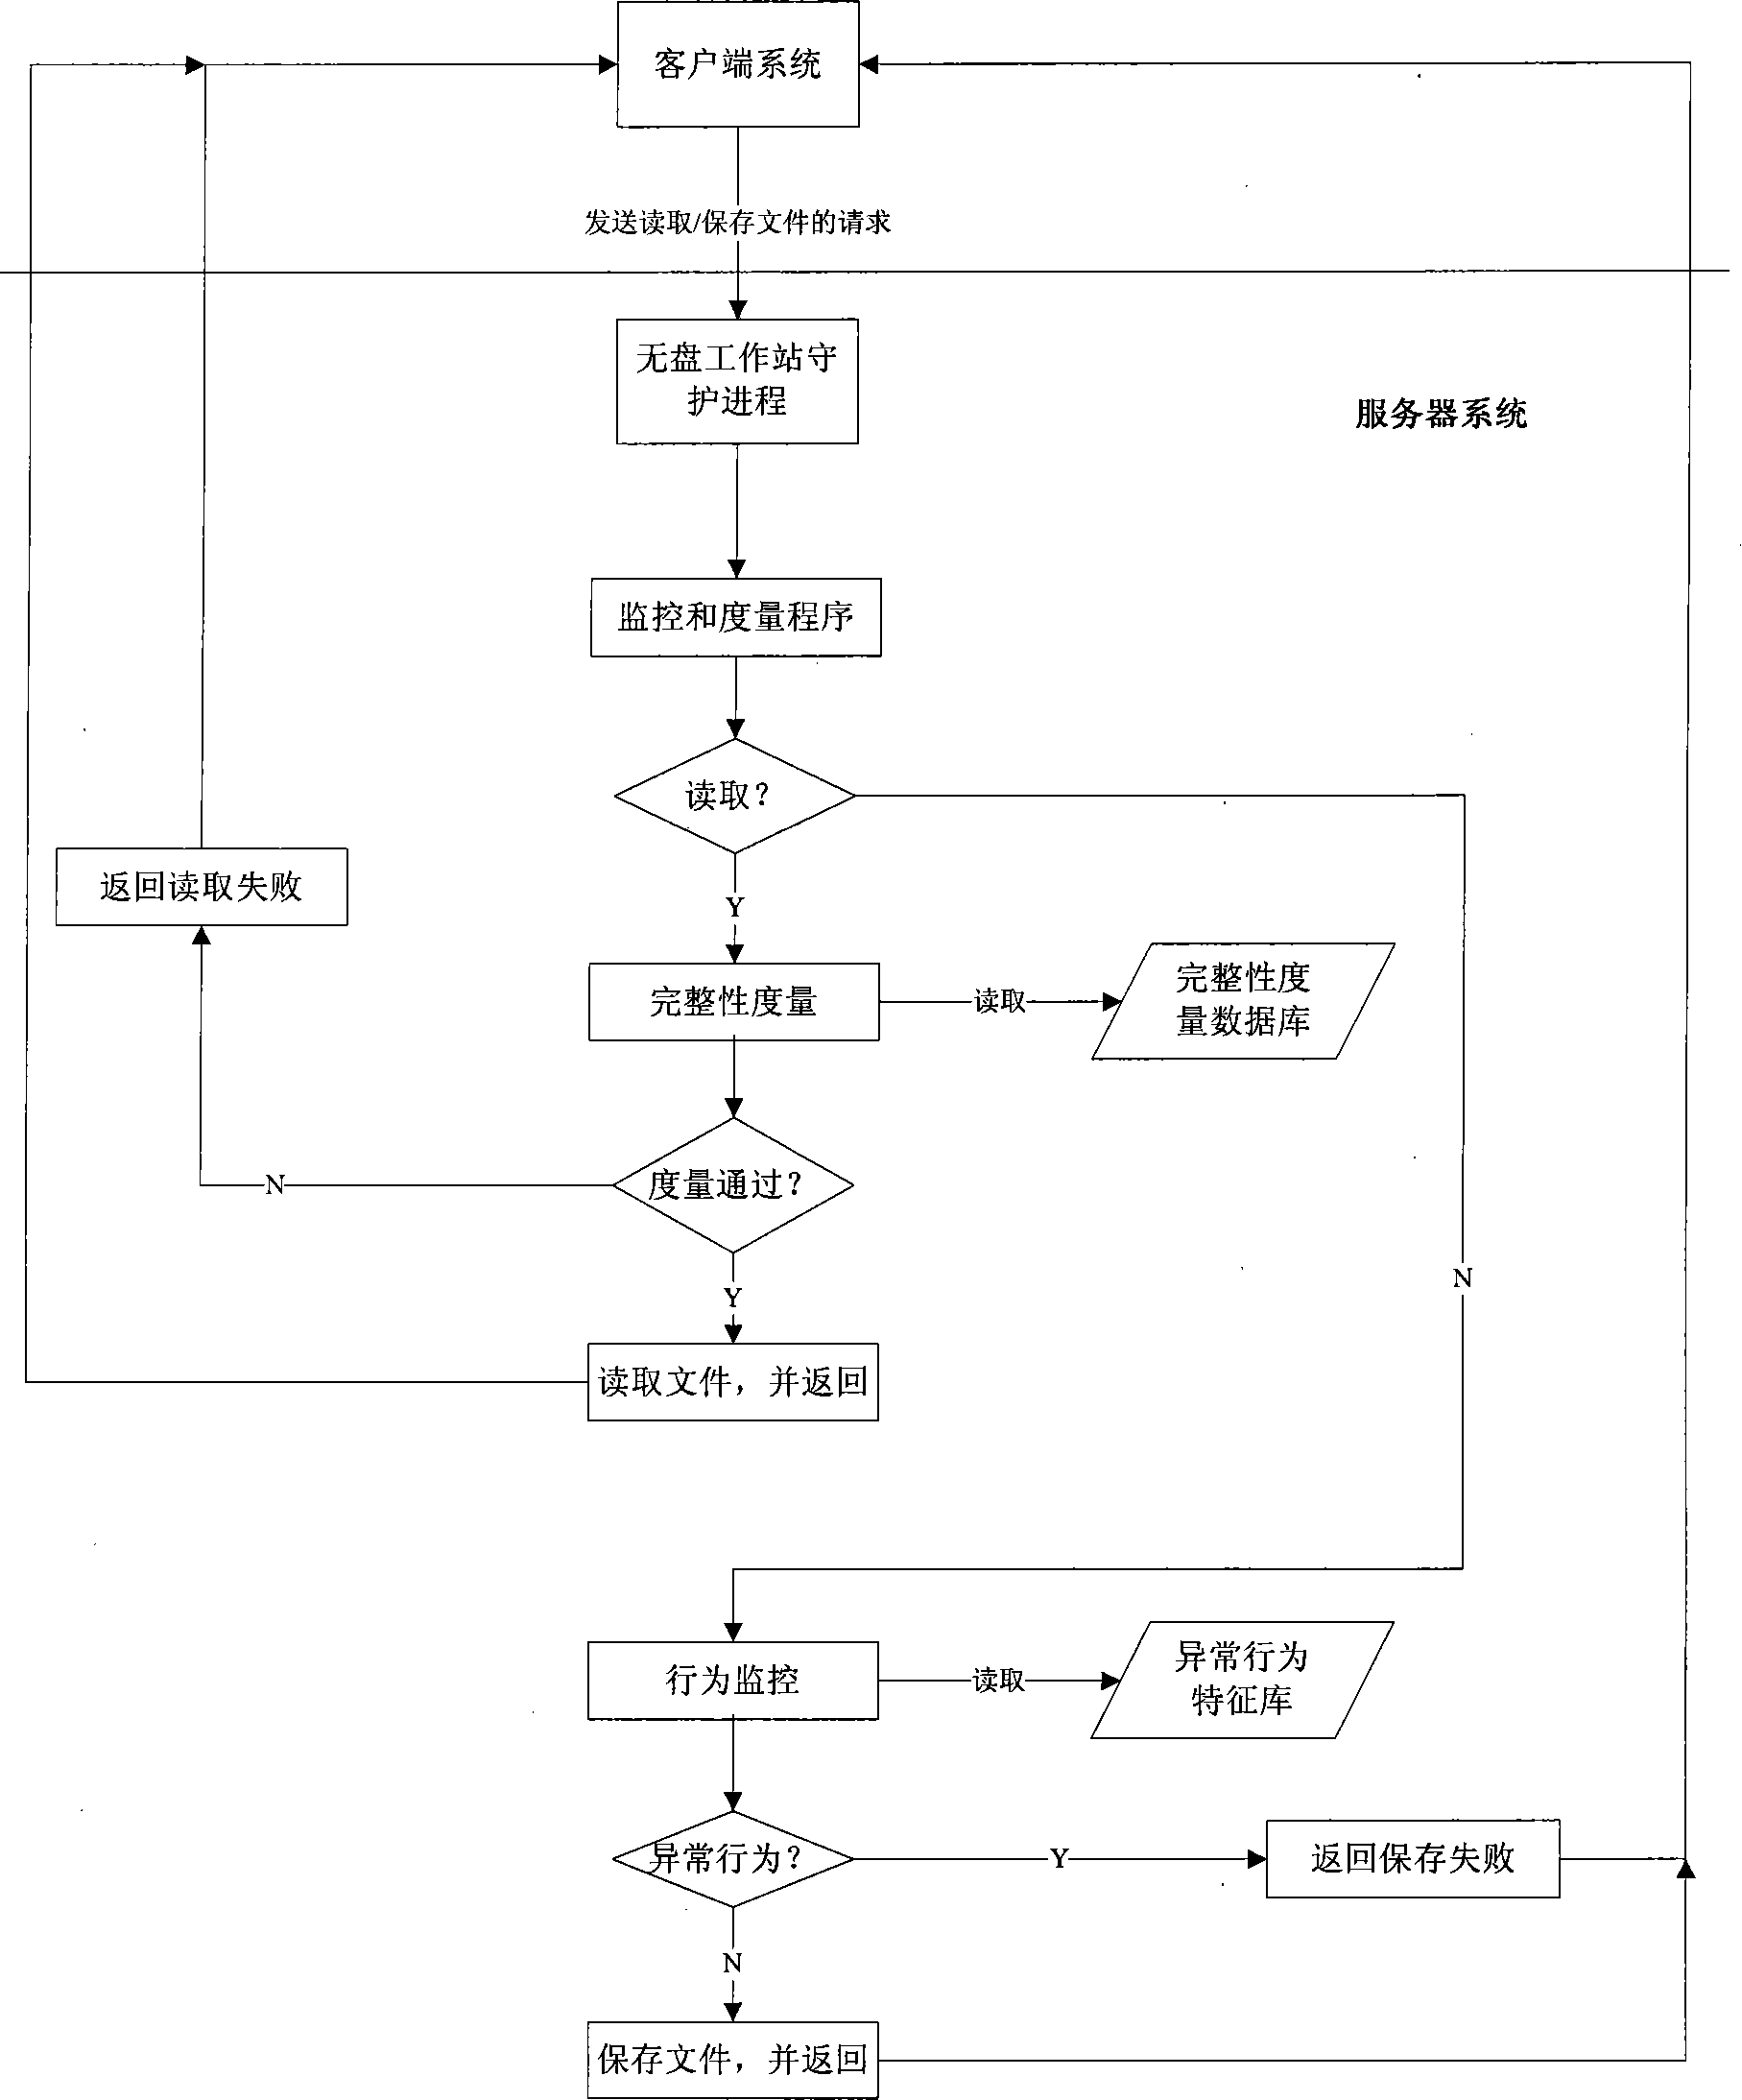 Method for implementing reliable network system based on reliable computation